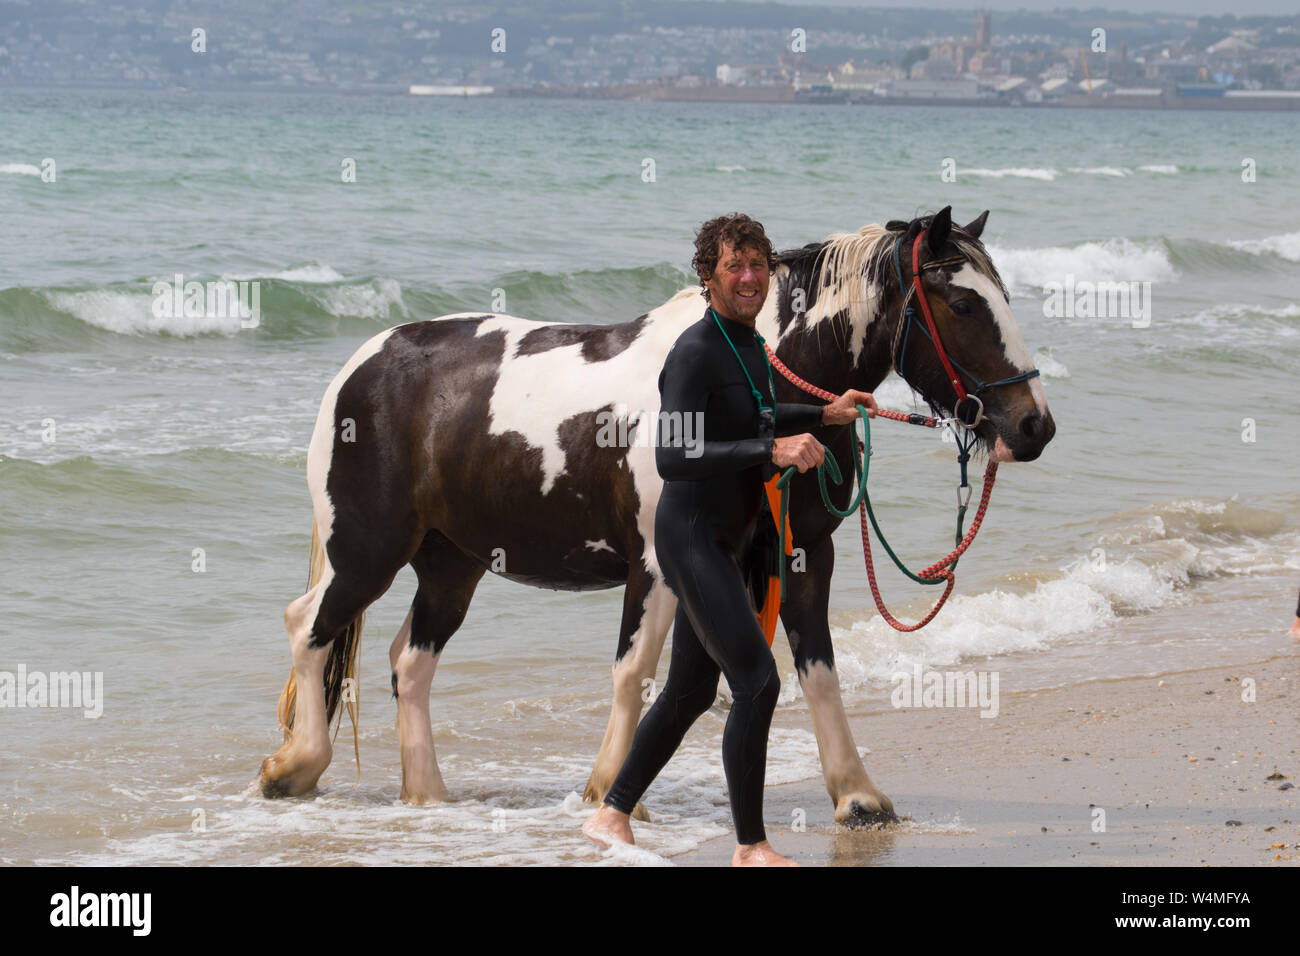 Longrock, Cornwall, UK. 24th July 2019. UK Weather. Rider and horses from Cornwall Swimming Horses cooling off in the heatwave with a dip in the sea this morning.  Credit Simon Maycock / Alamy Live News. Stock Photo